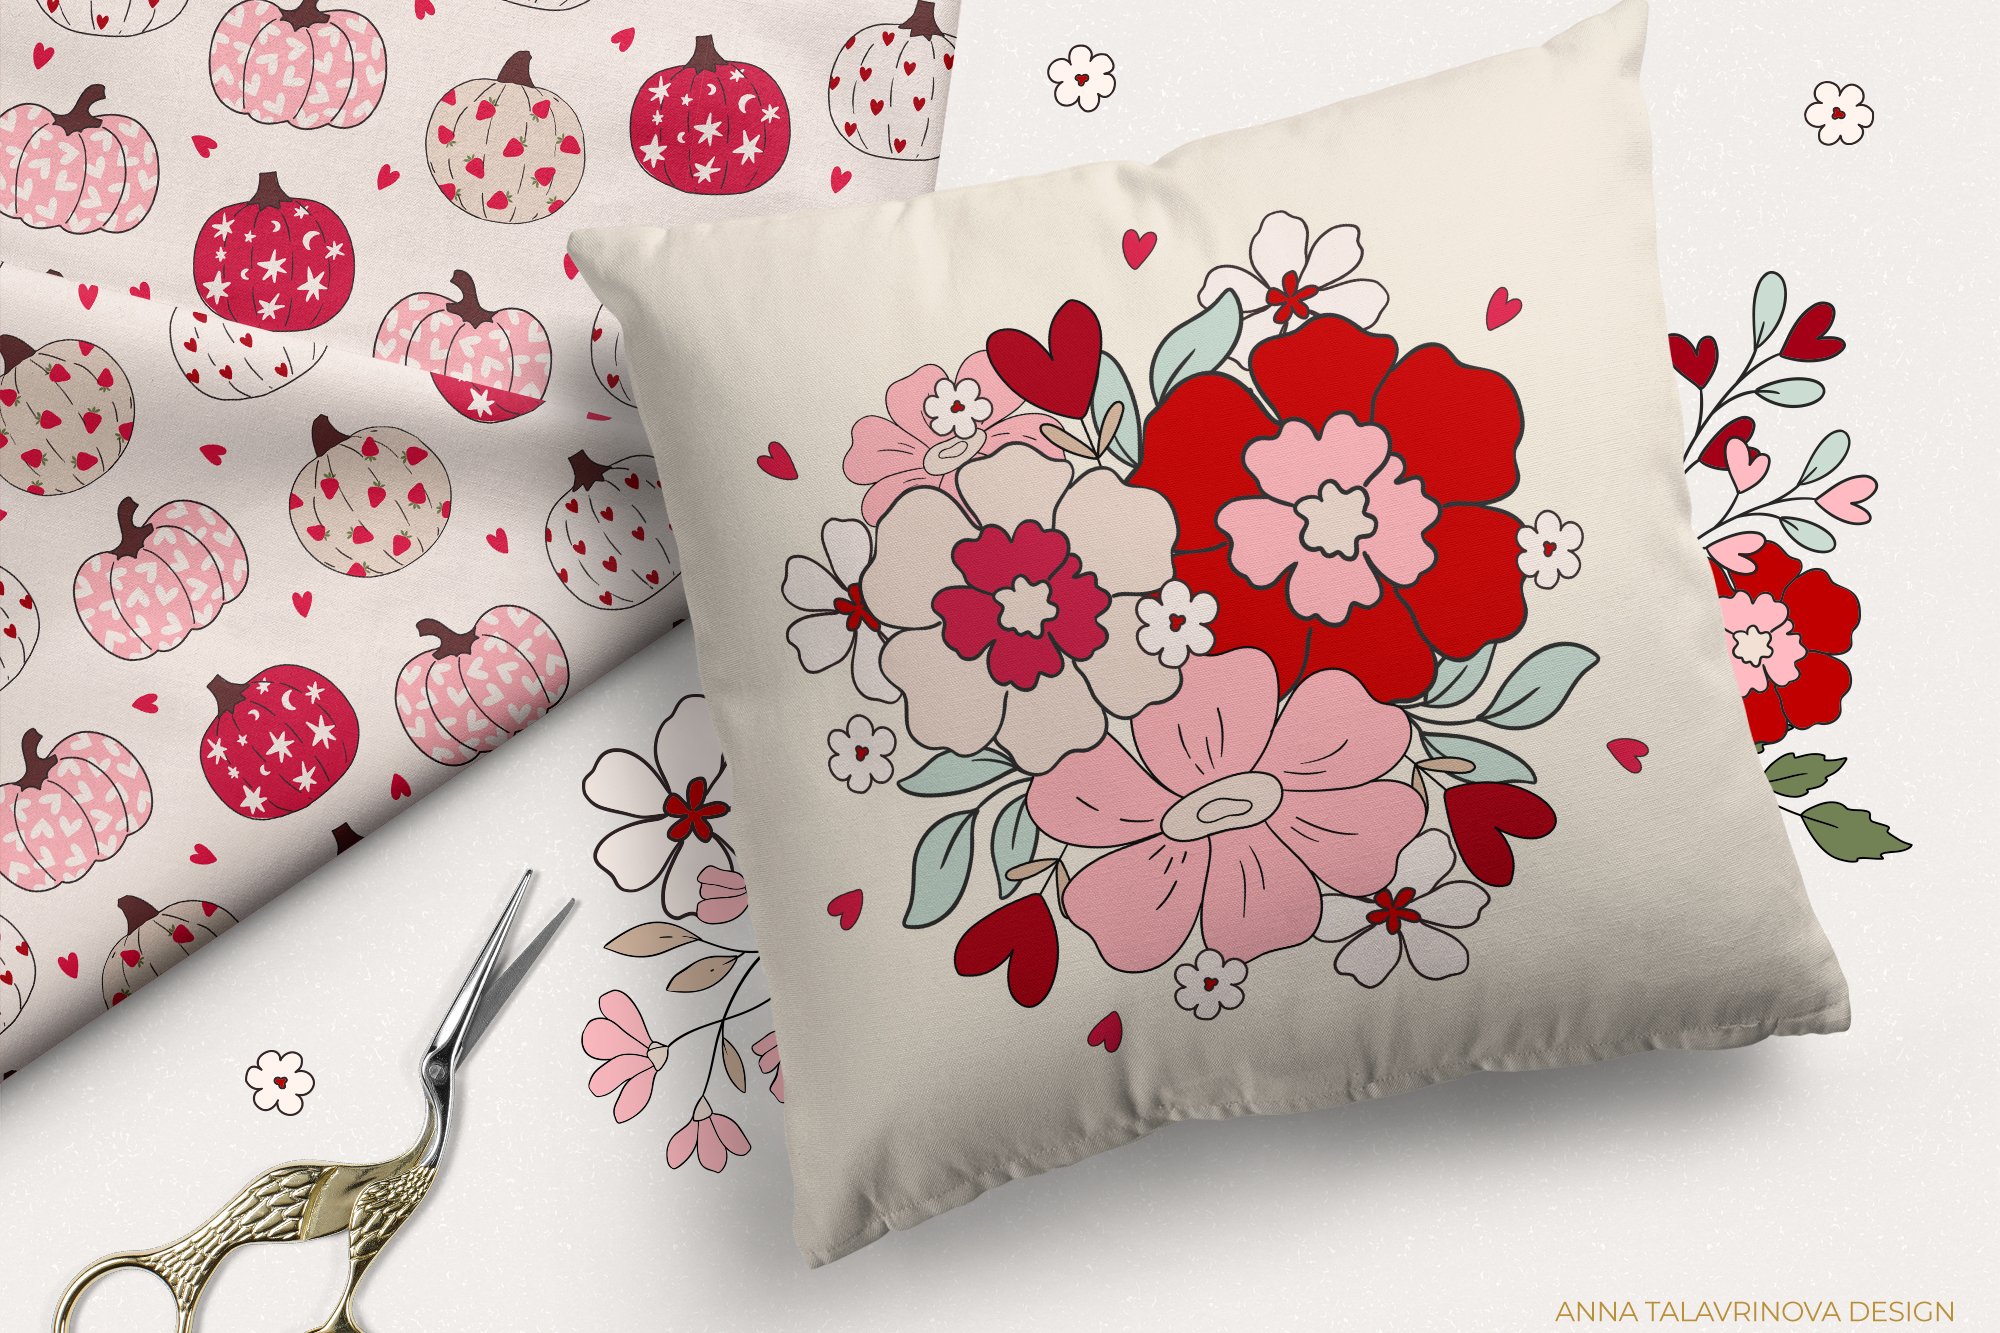 Light pillow with delicate flowers.